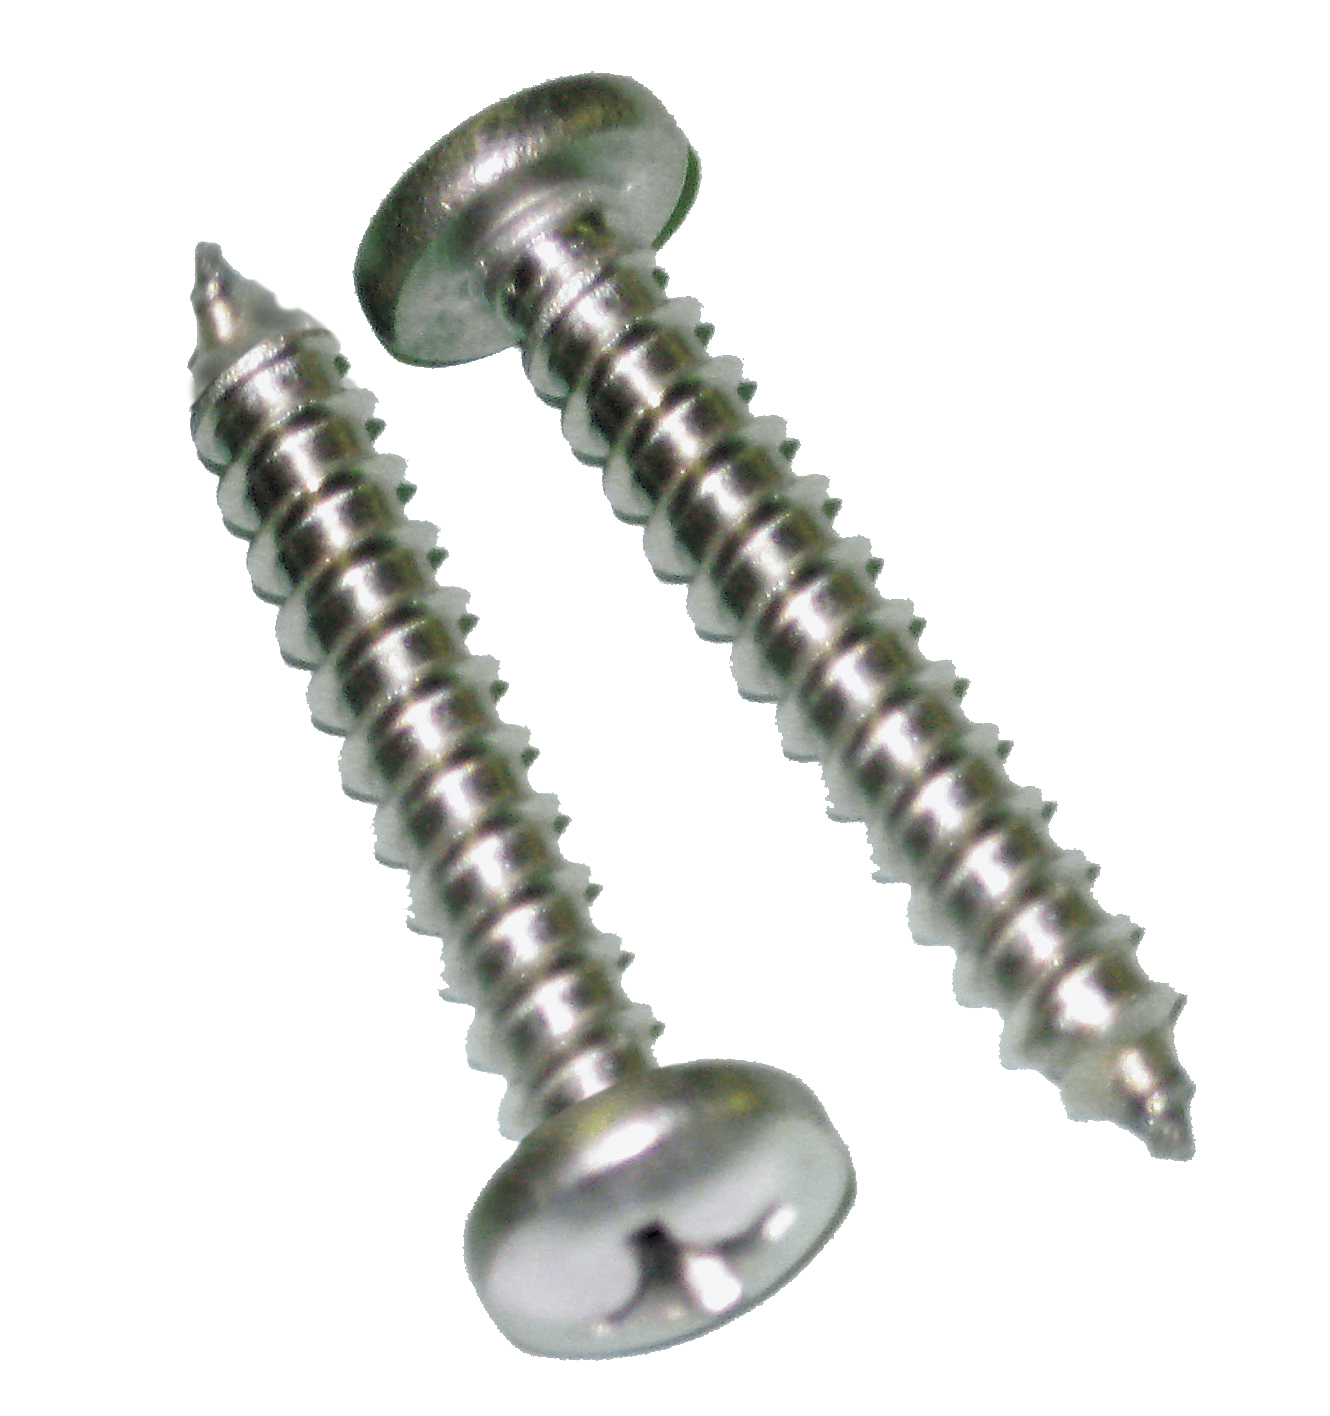 Bright Finish Stainless Steel 304 Self Tapping Phillips Drive Screws 18-8 Full Thread #8 x 3/4 Stainless Truss Head Sheet Metal Screws Wood Screws 100 of Pack 